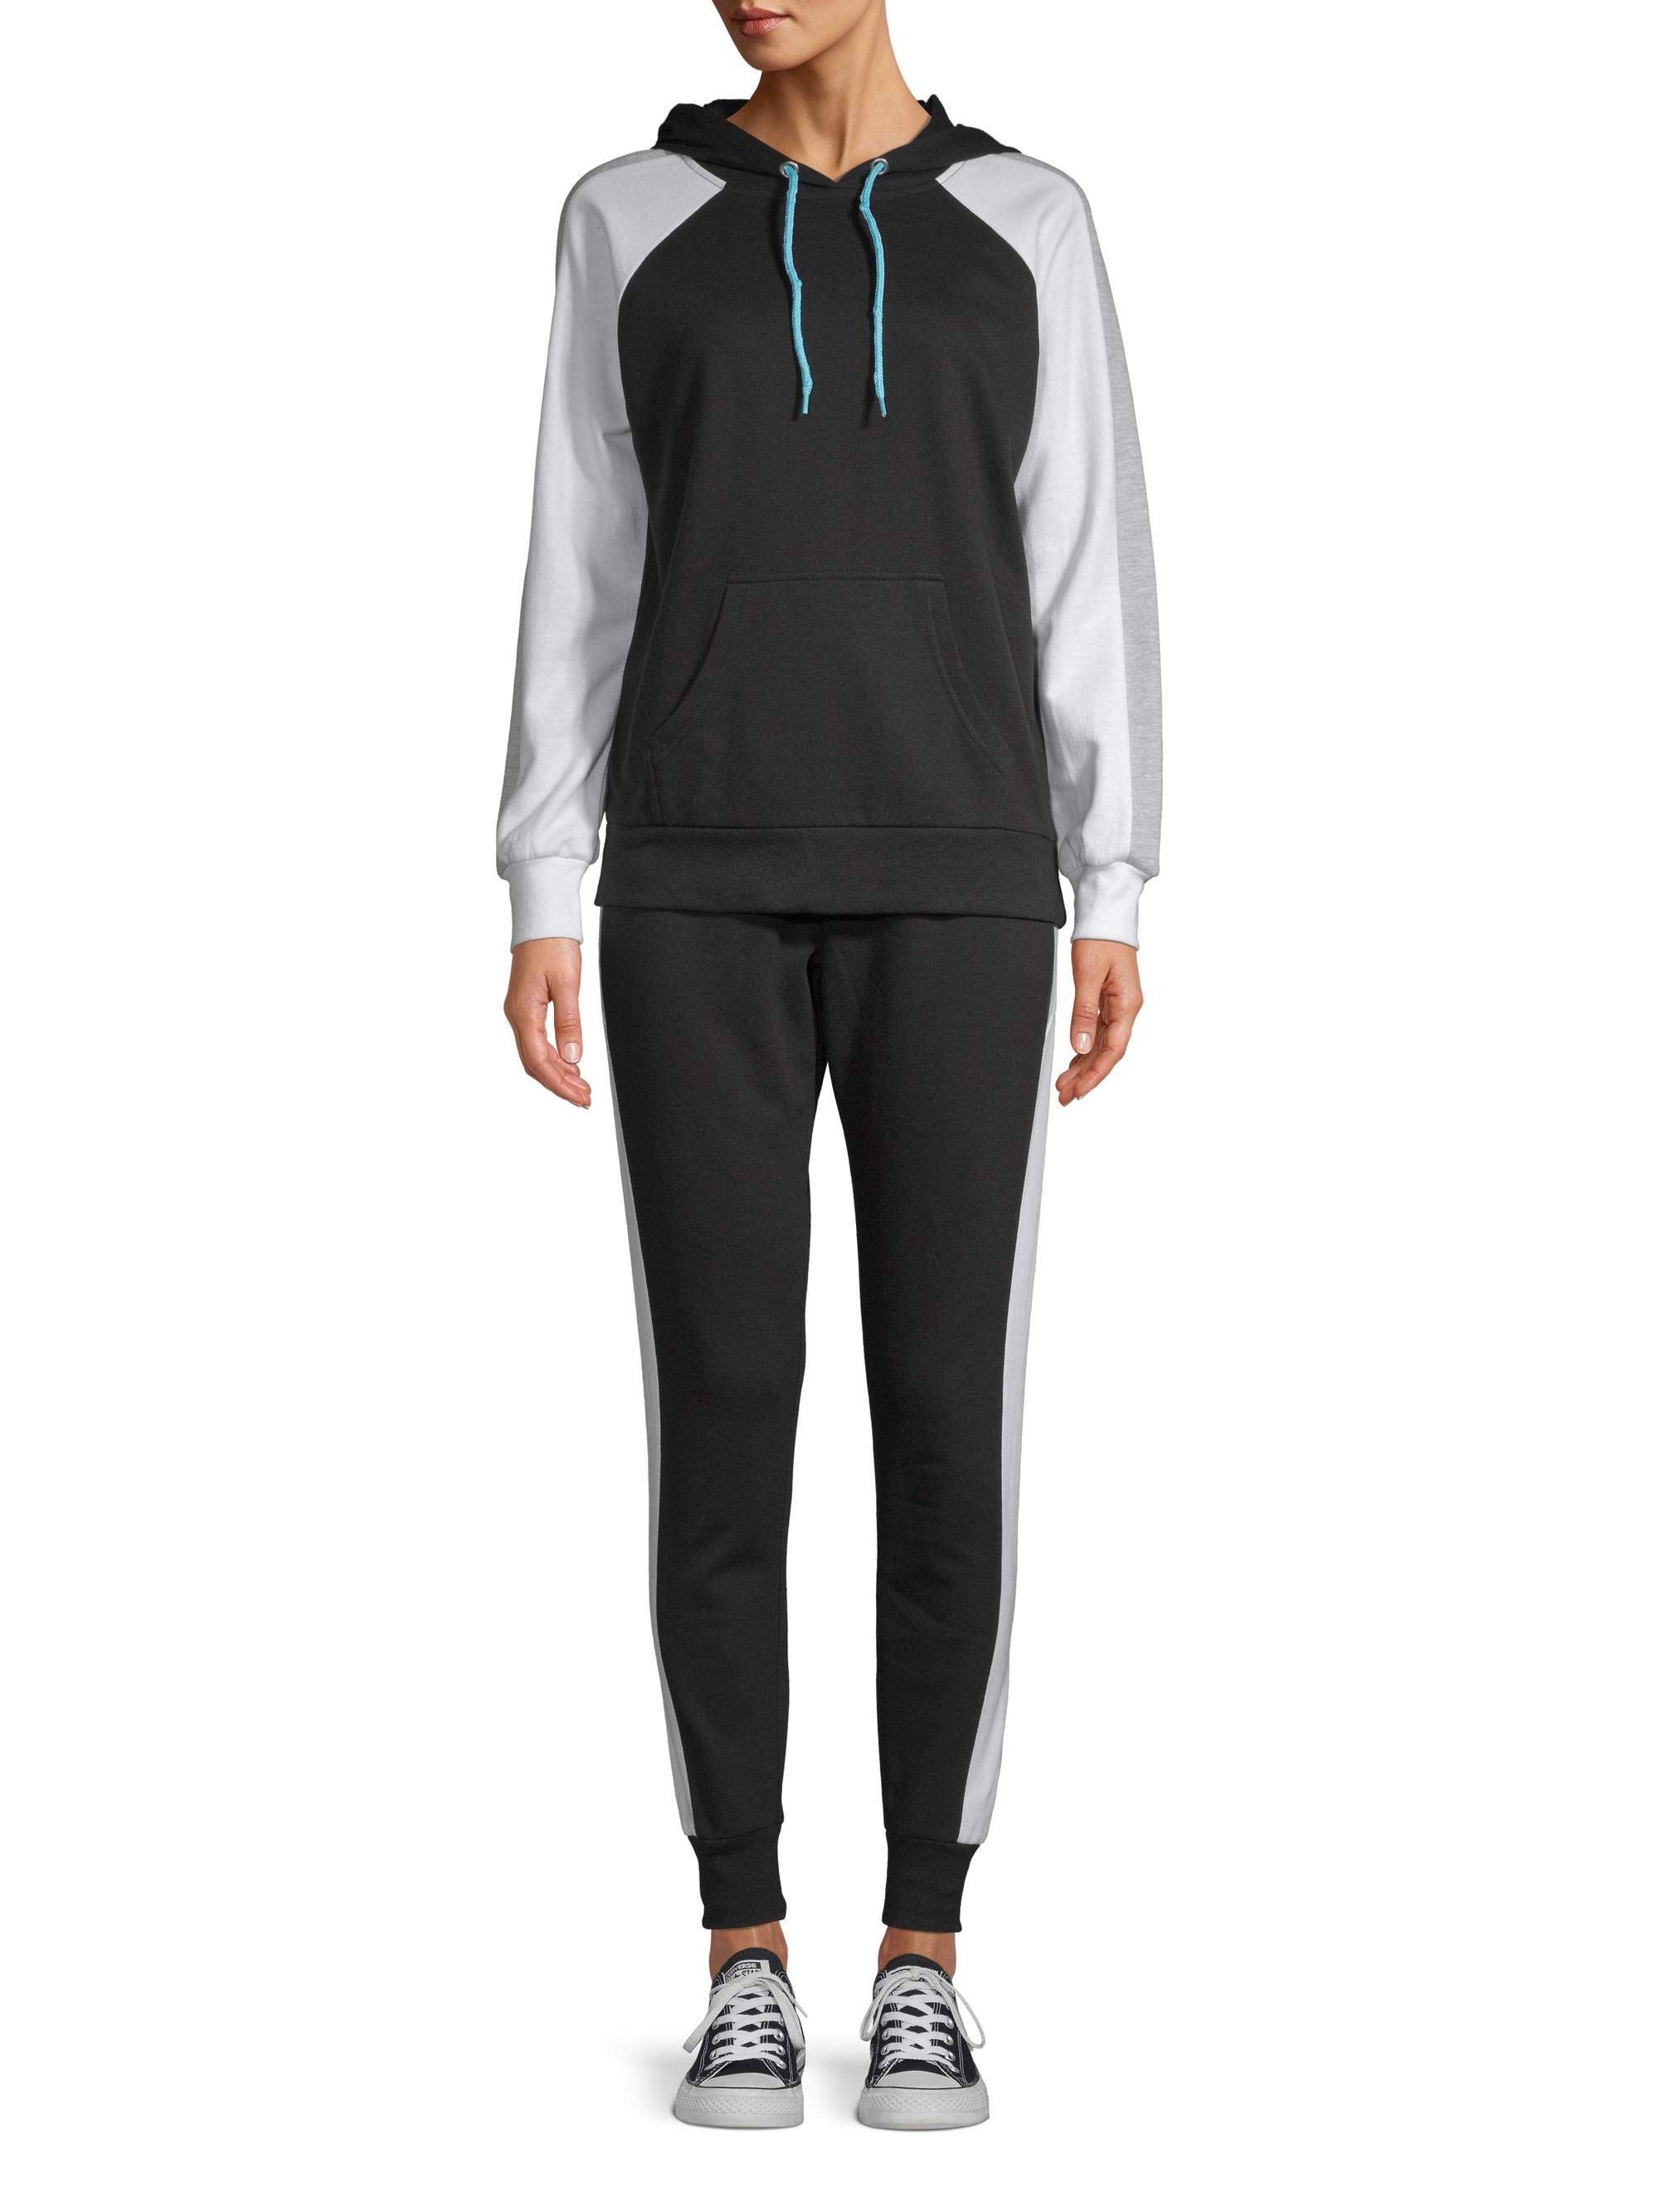 Feathers Women's Athleisure Fleece Hoodie and Jogger Set - image 1 of 5